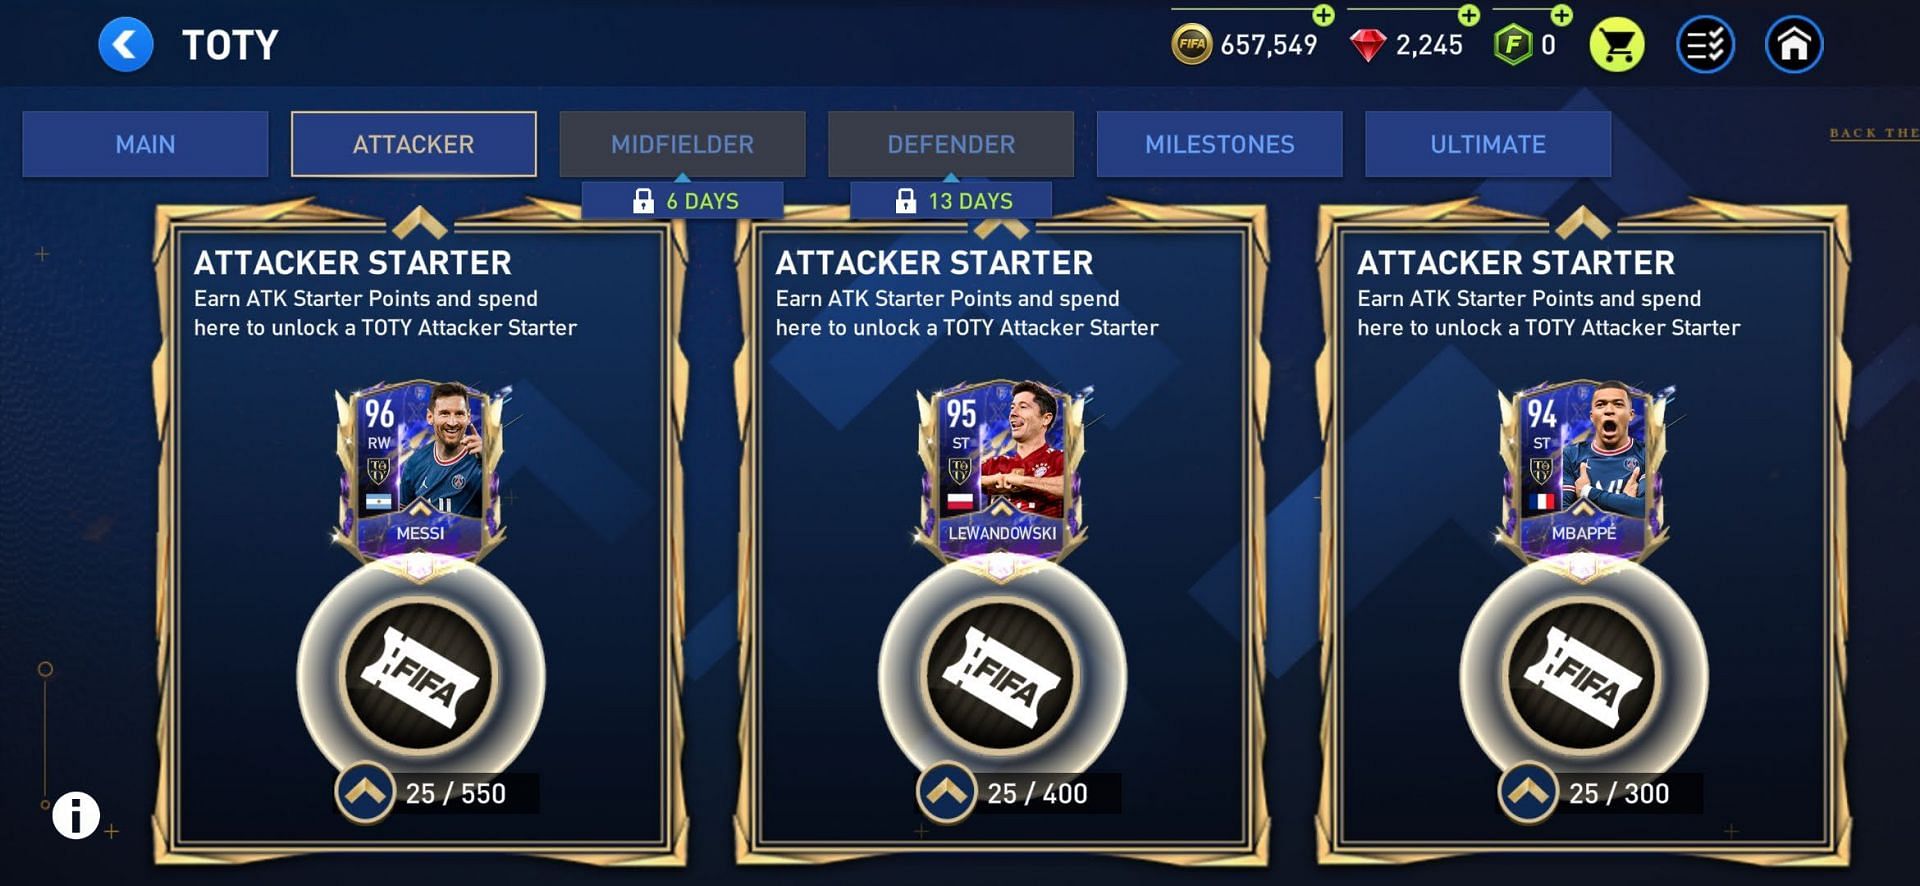 FIFA Mobile 22 – Team of the Year (TOTY) – FIFPlay